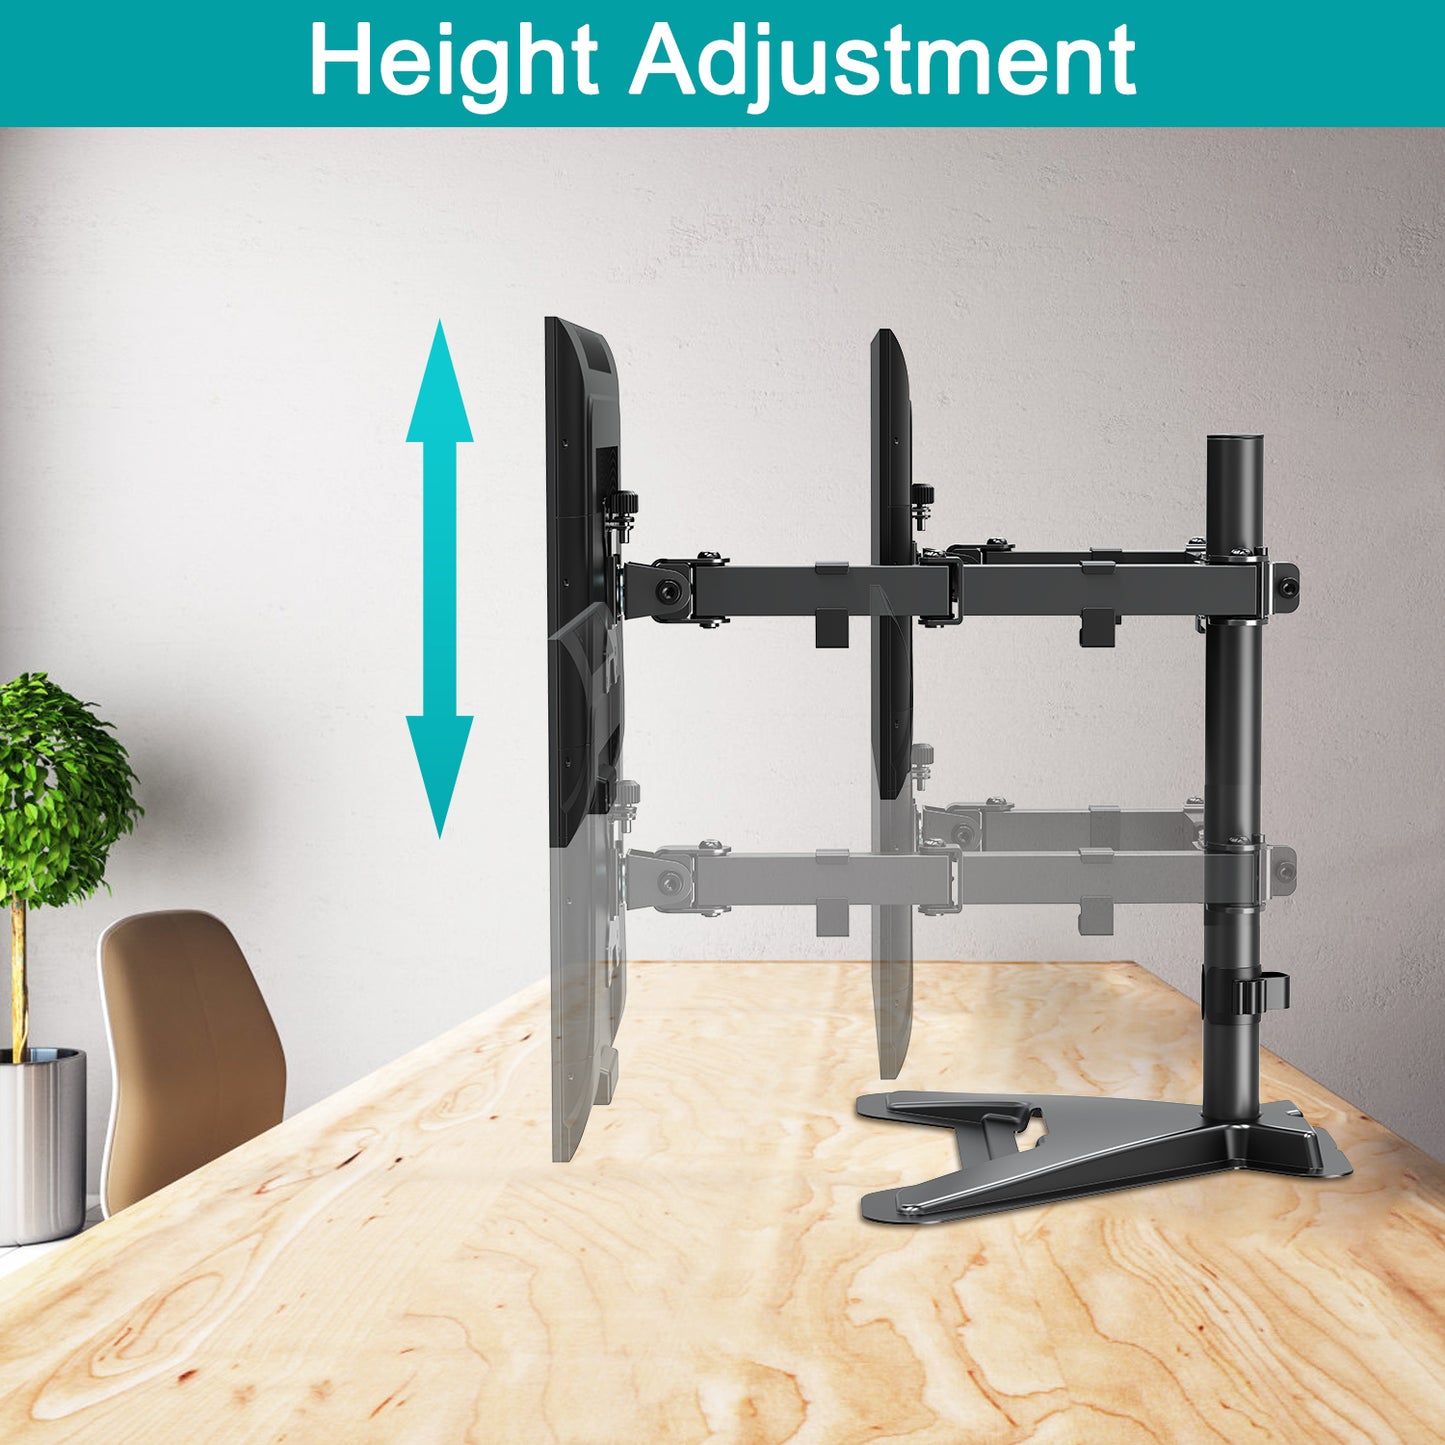 MOUNT PRO Dual Monitor Stand - Free Standing Full Motion Monitor Desk Mount Fits 2 Screens up to 27 inches,17.6lbs with Height Adjustable, Swivel, Tilt, Rotation, VESA 75x75 100x100